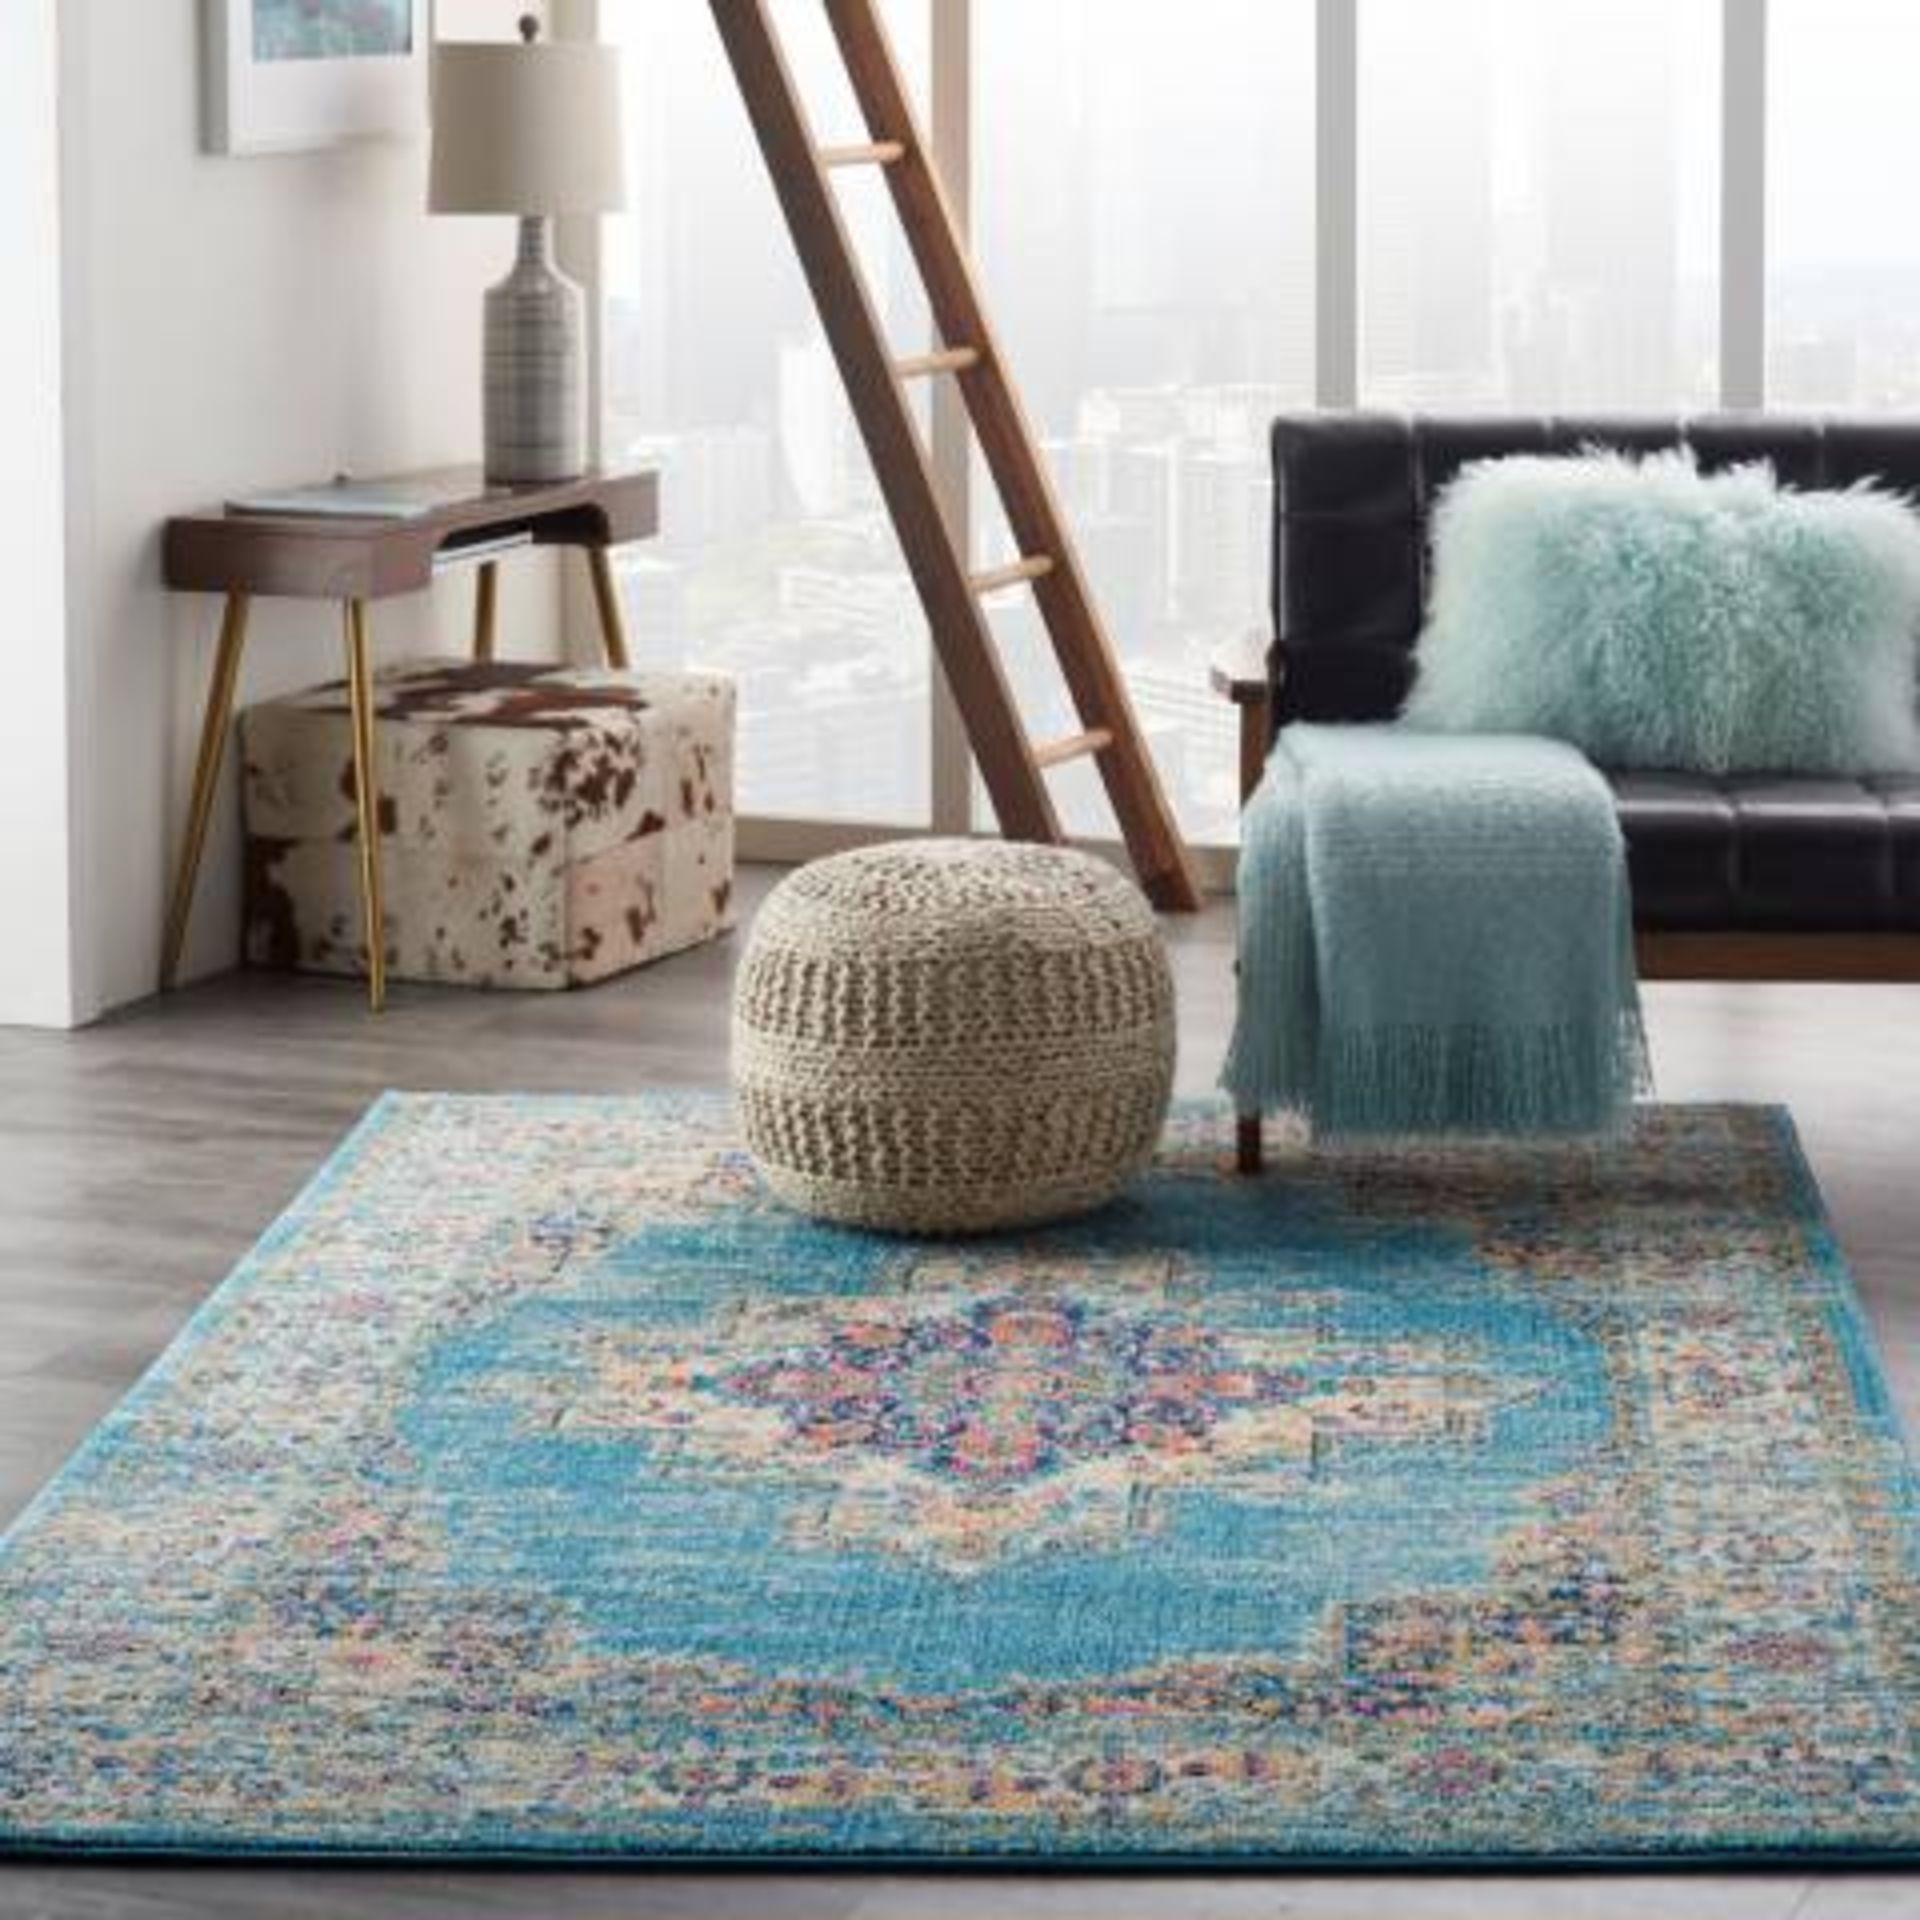 Light Blue Passion Rug Rich, seductive colour draws you into the plush beauty of the Passion rug The - Image 3 of 3